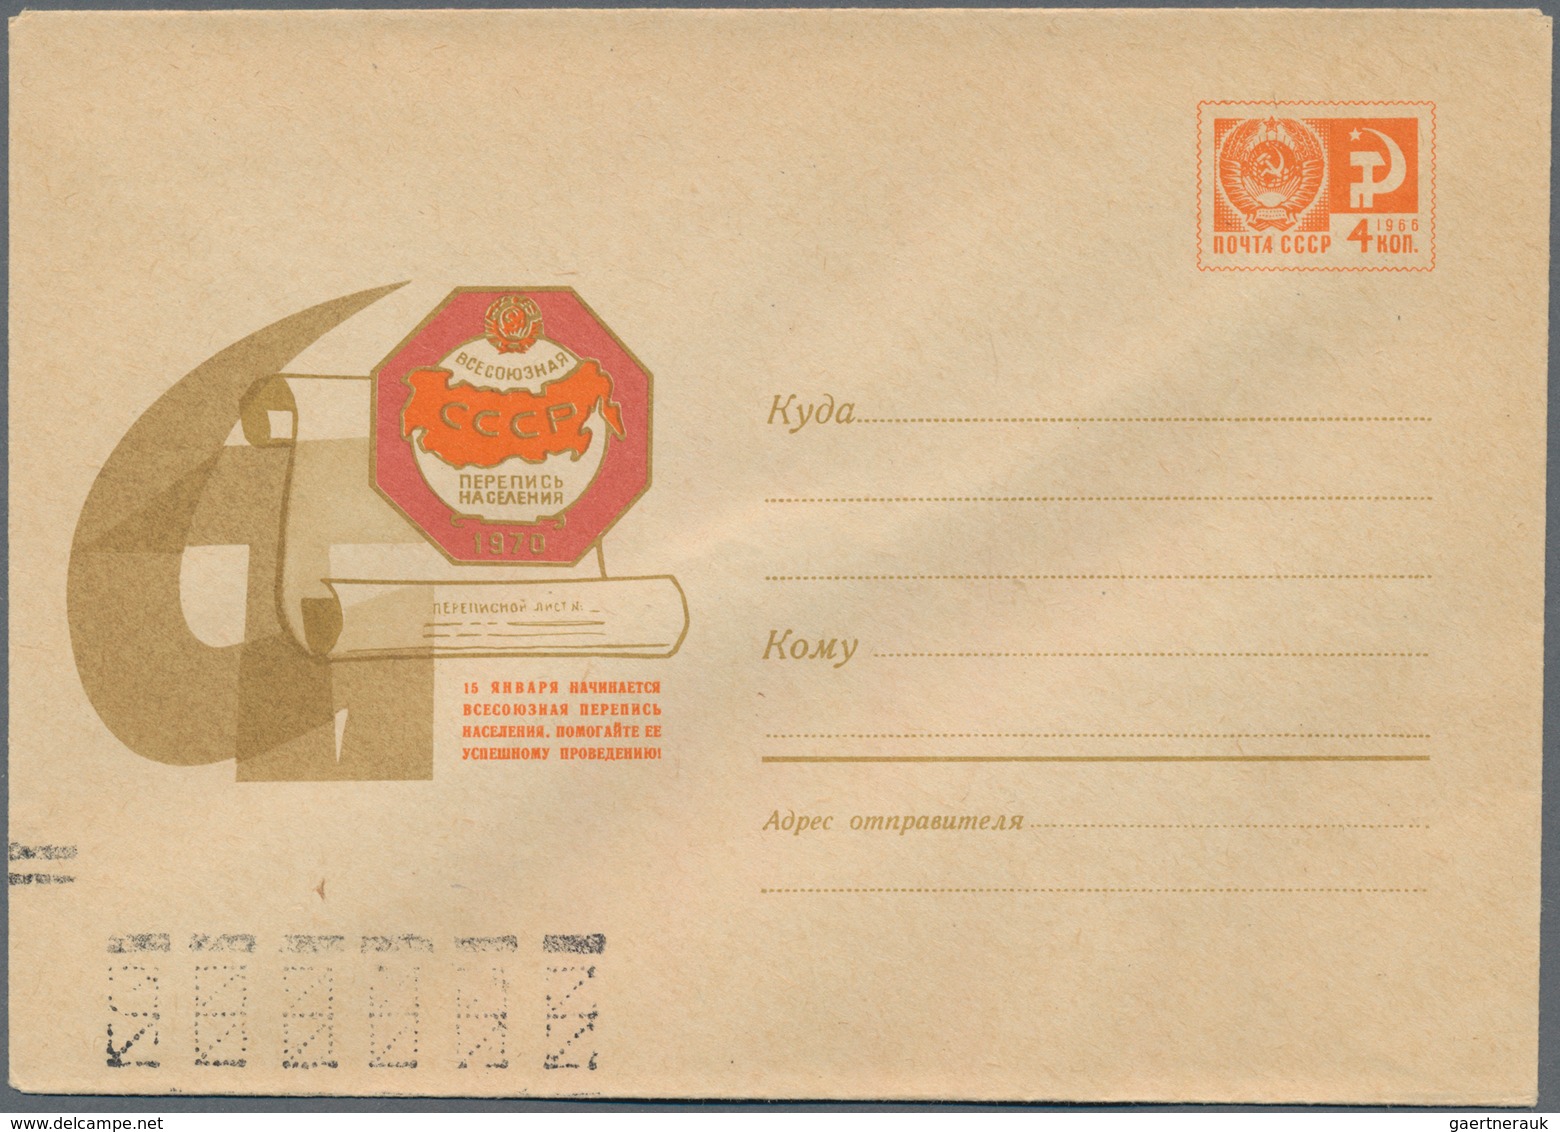 Sowjetunion - Ganzsachen: 1969/70 postal stationery 5 unused picture postcards, two of them with spe